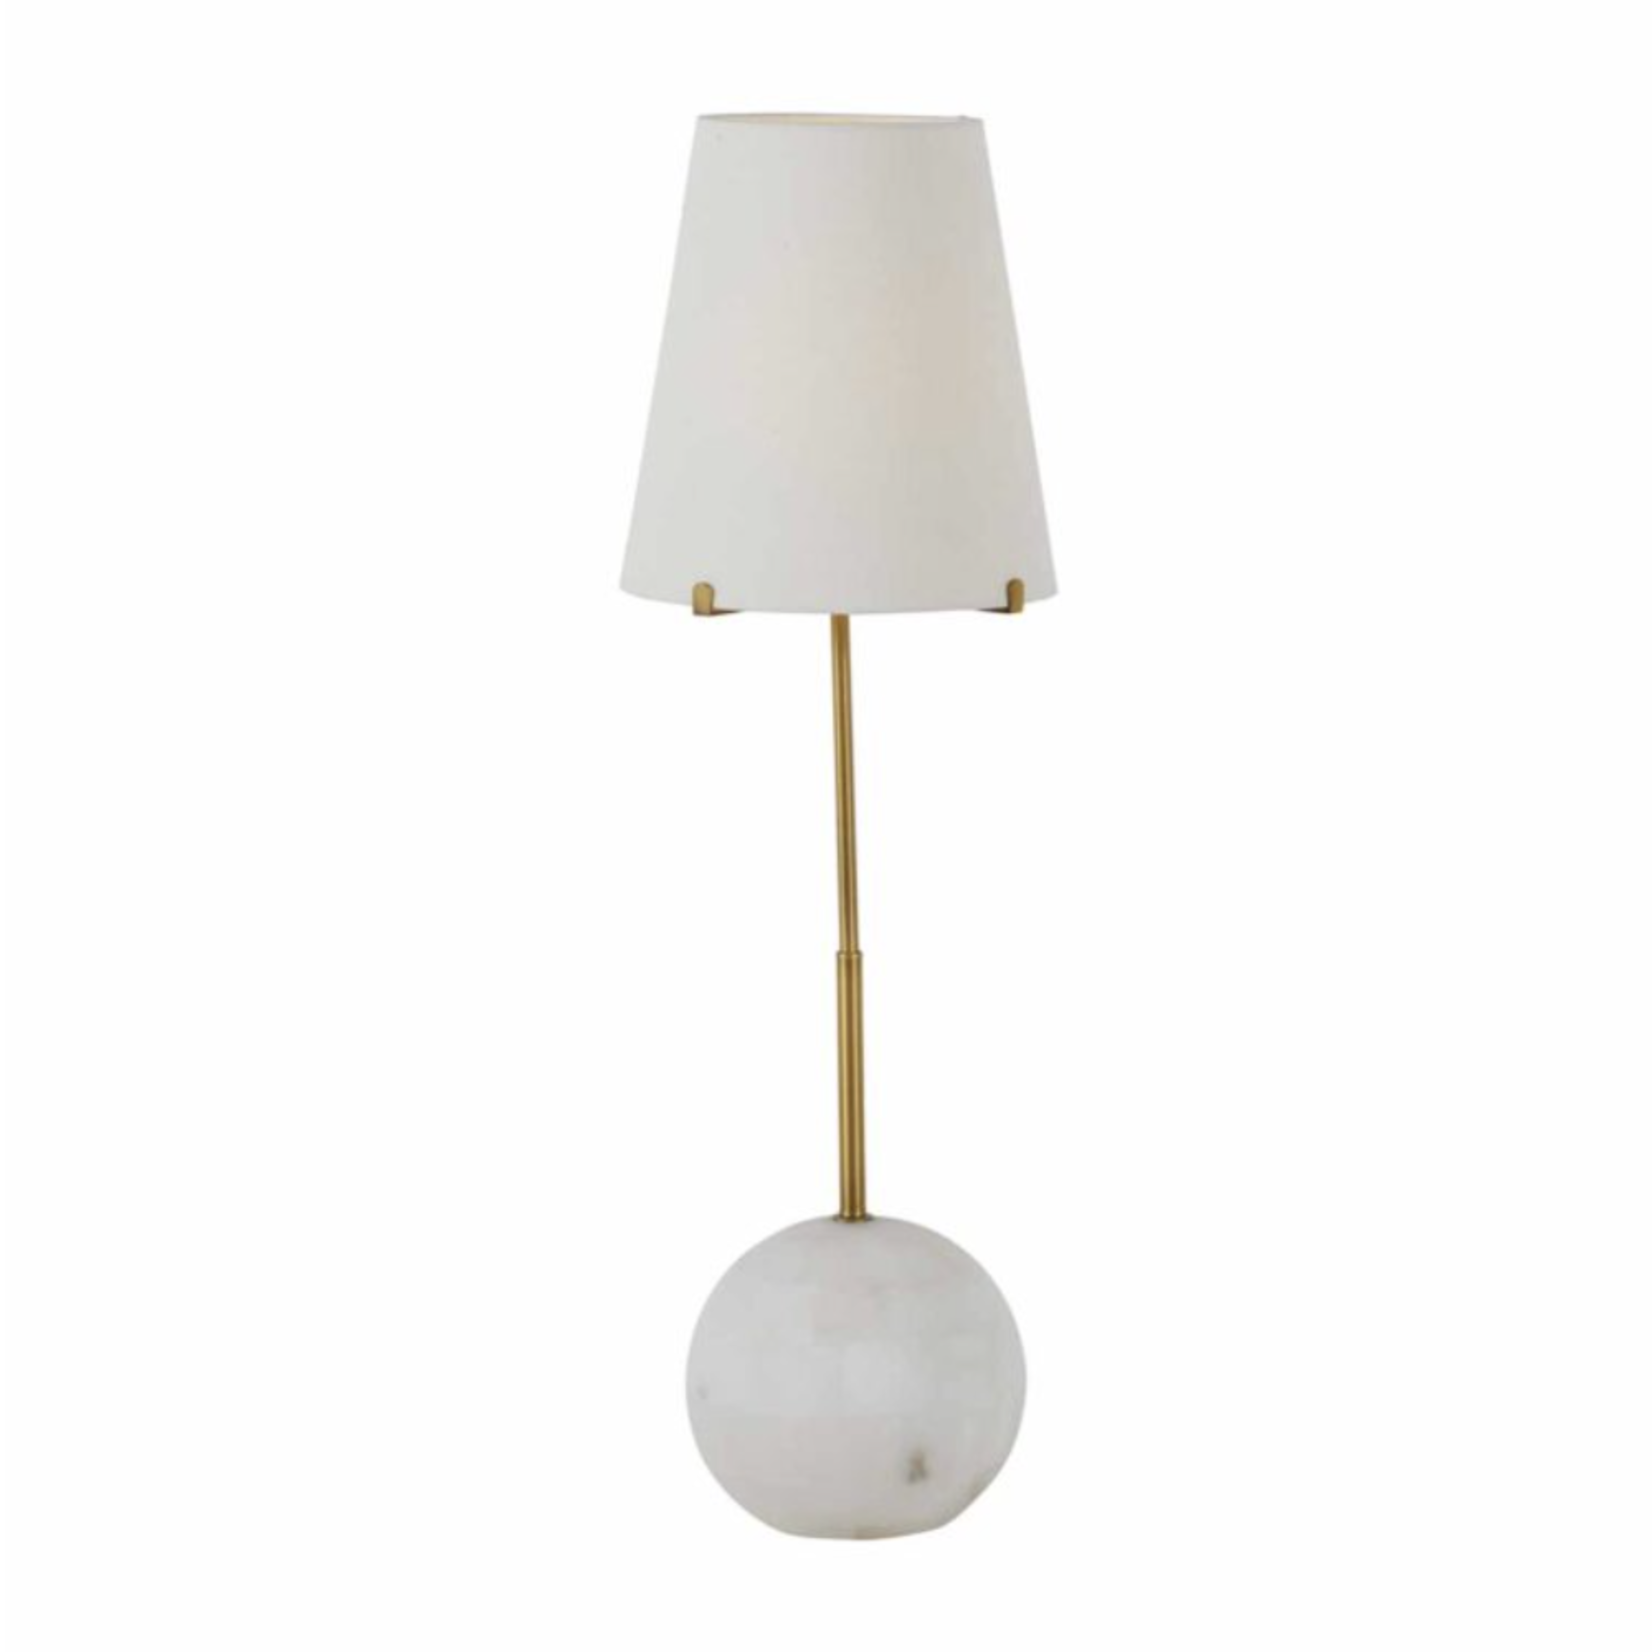 Outside The Box 32" Janie Solid Alabaster & Gold Accent Table Lamp